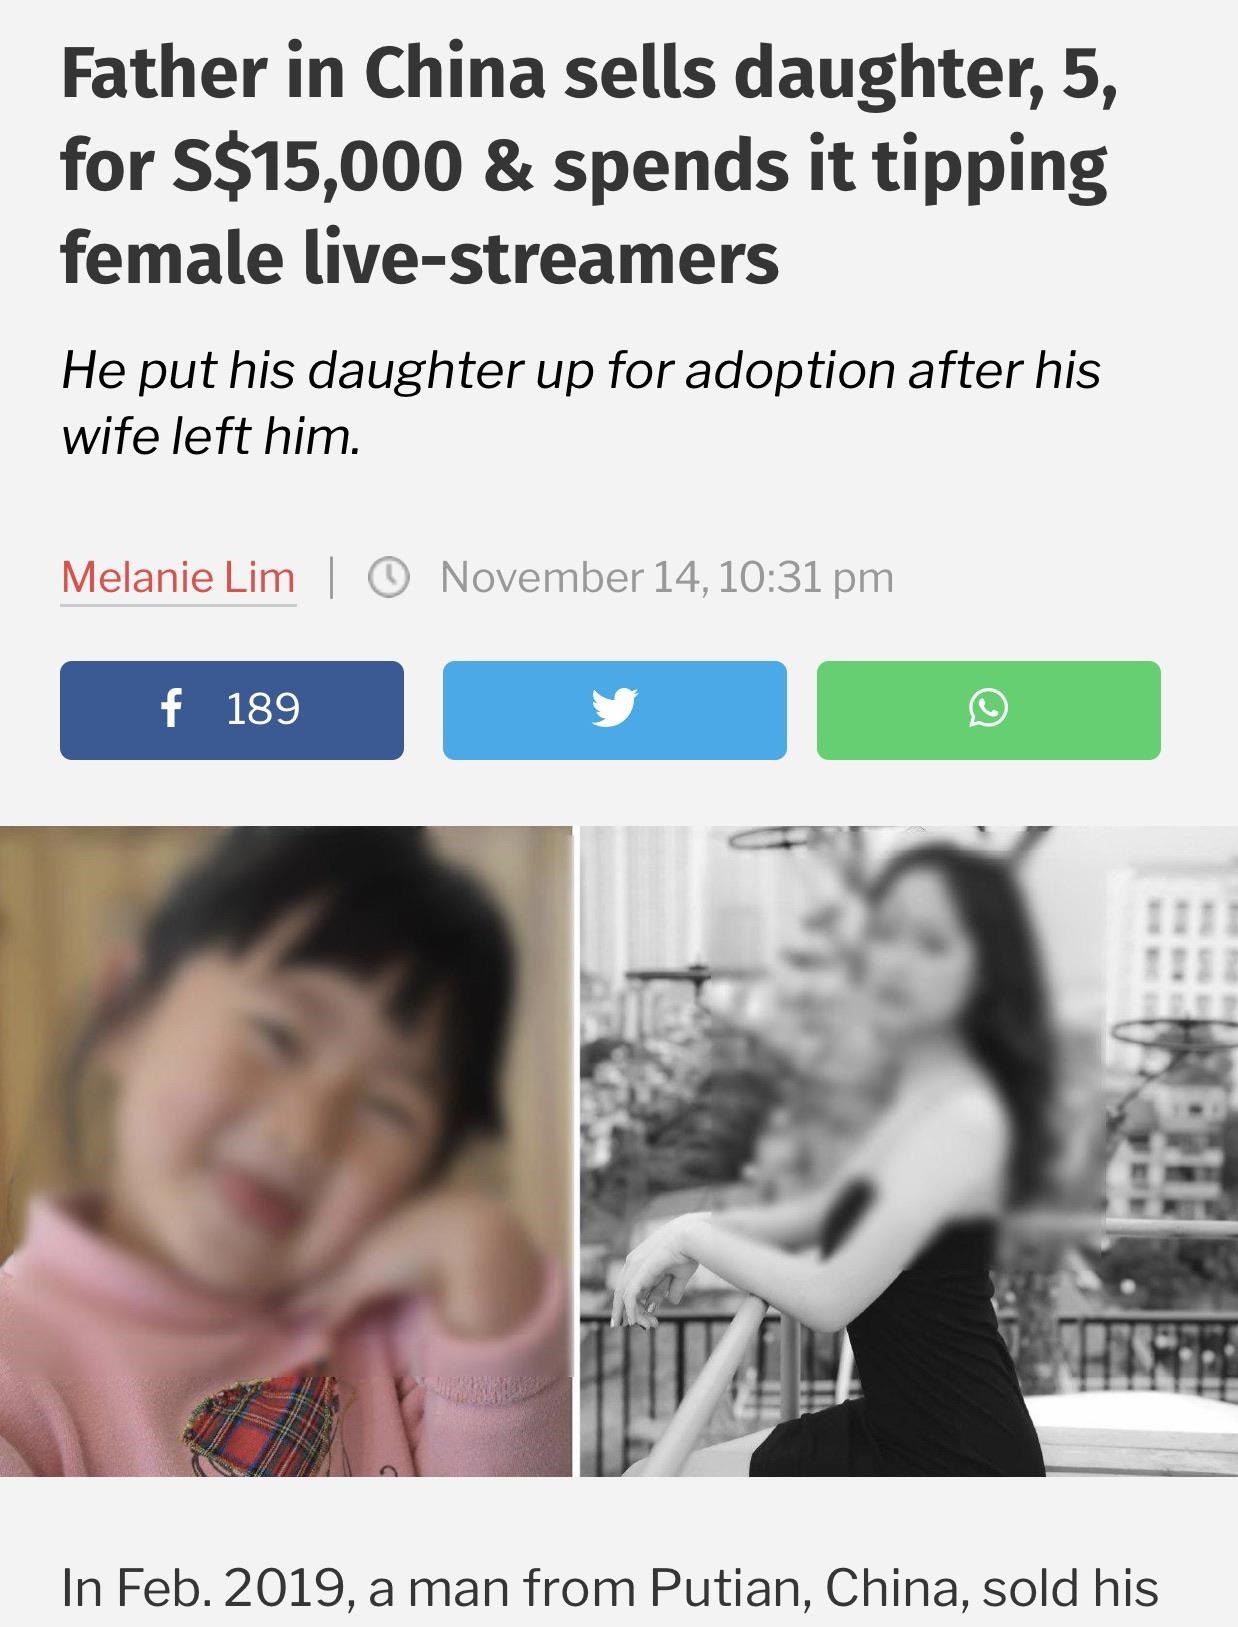 conversation - Father in China sells daughter, 5, for S$15,000 & spends it tipping female livestreamers He put his daughter up for adoption after his wife left him. Melanie Lim | November 14, f 189 In Feb. 2019, a man from Putian, China, sold his